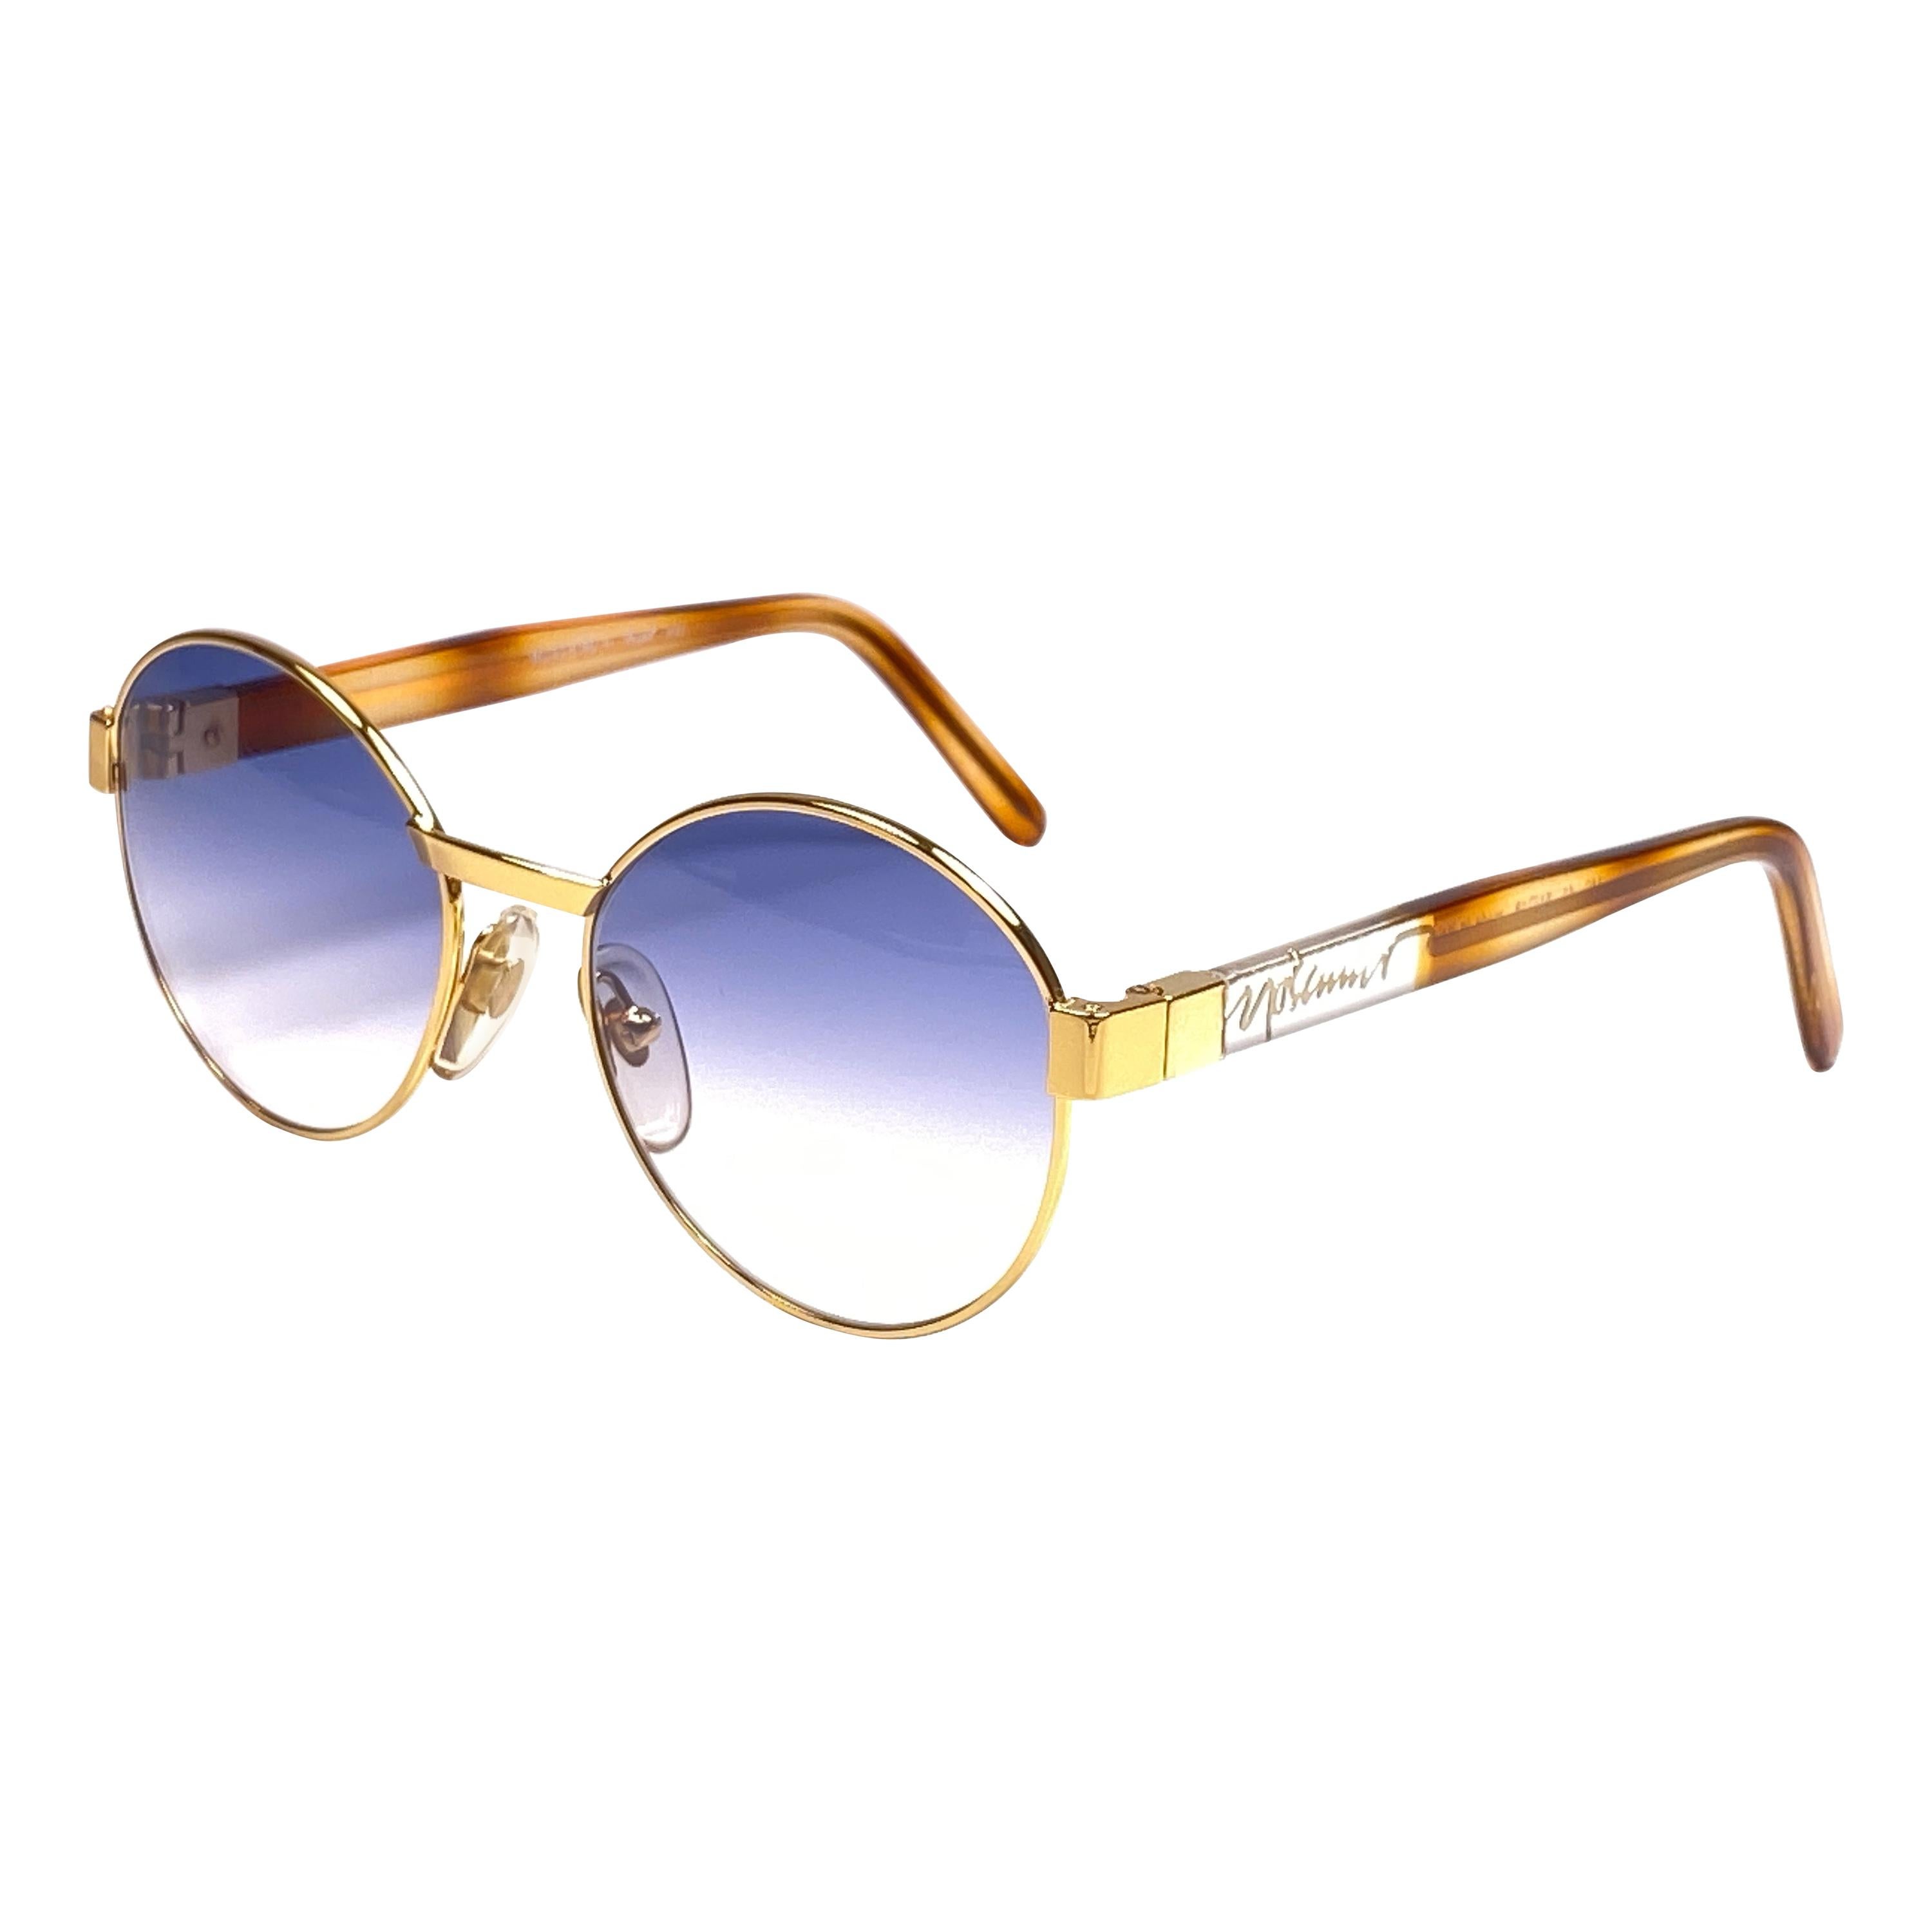 New Vintage Moschino By Persol M32 Frame Medium Round Gold Sunglasses  For Sale